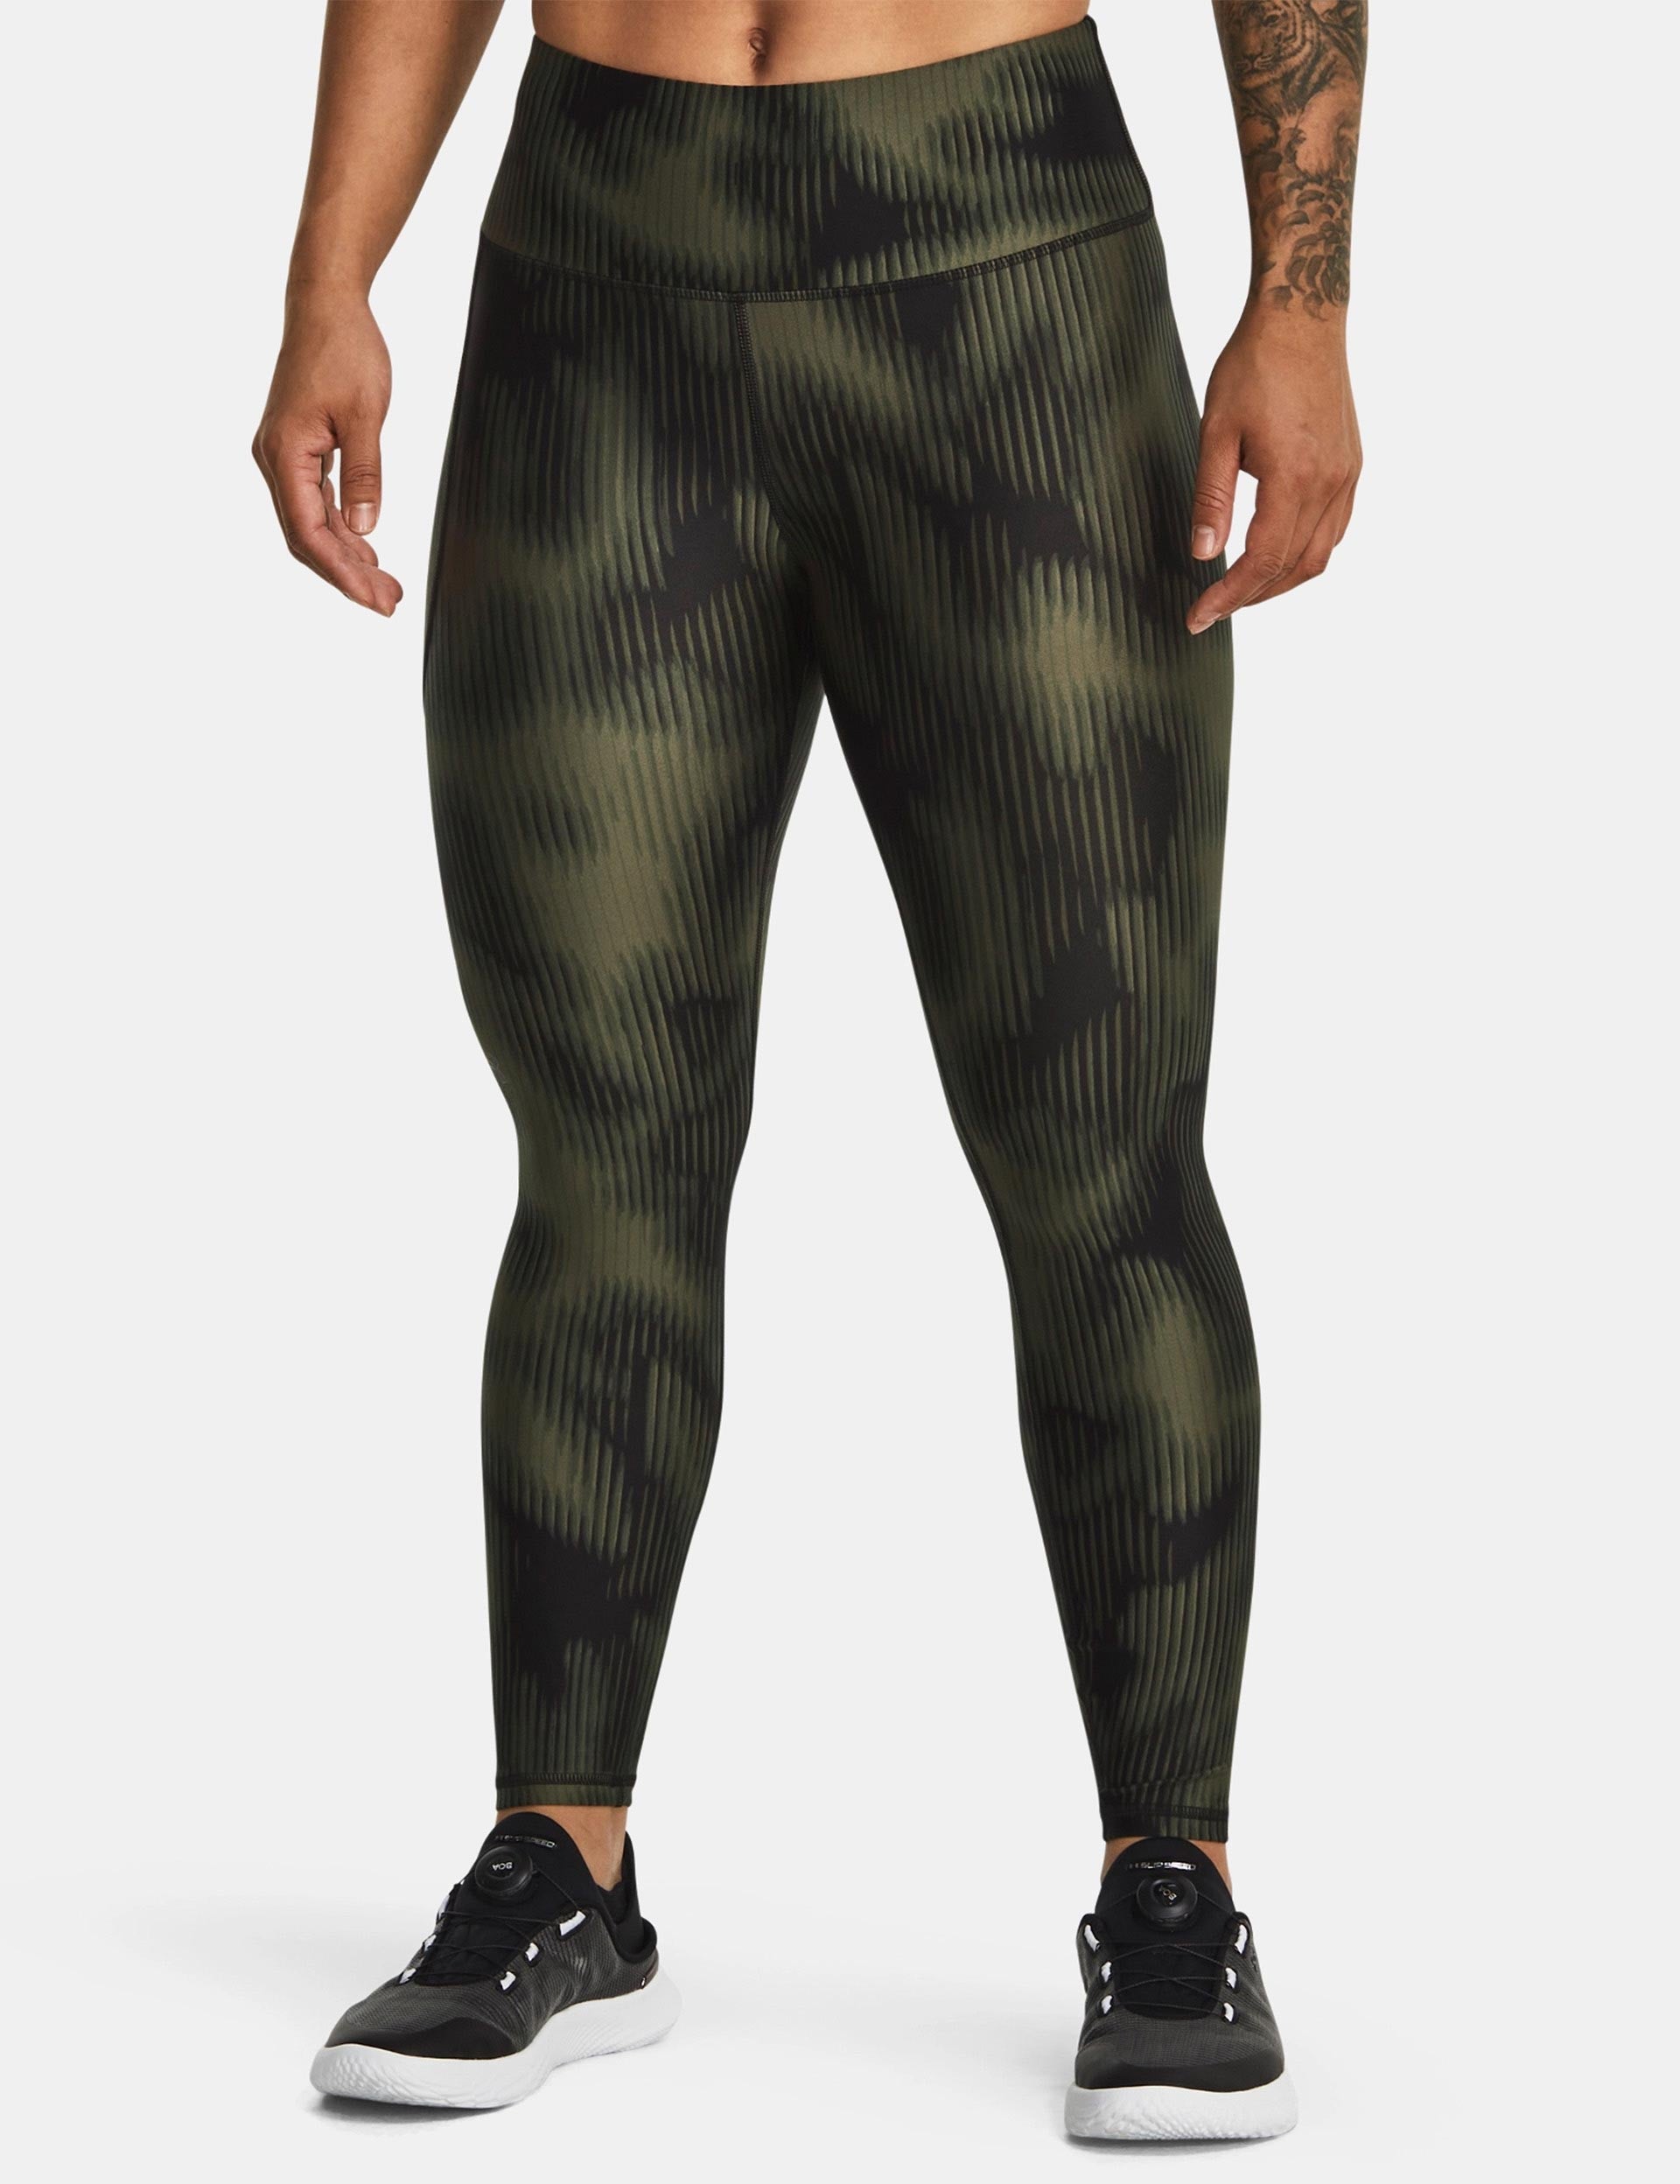 Drop And Give Me Reflective Camo Ankle Leggings